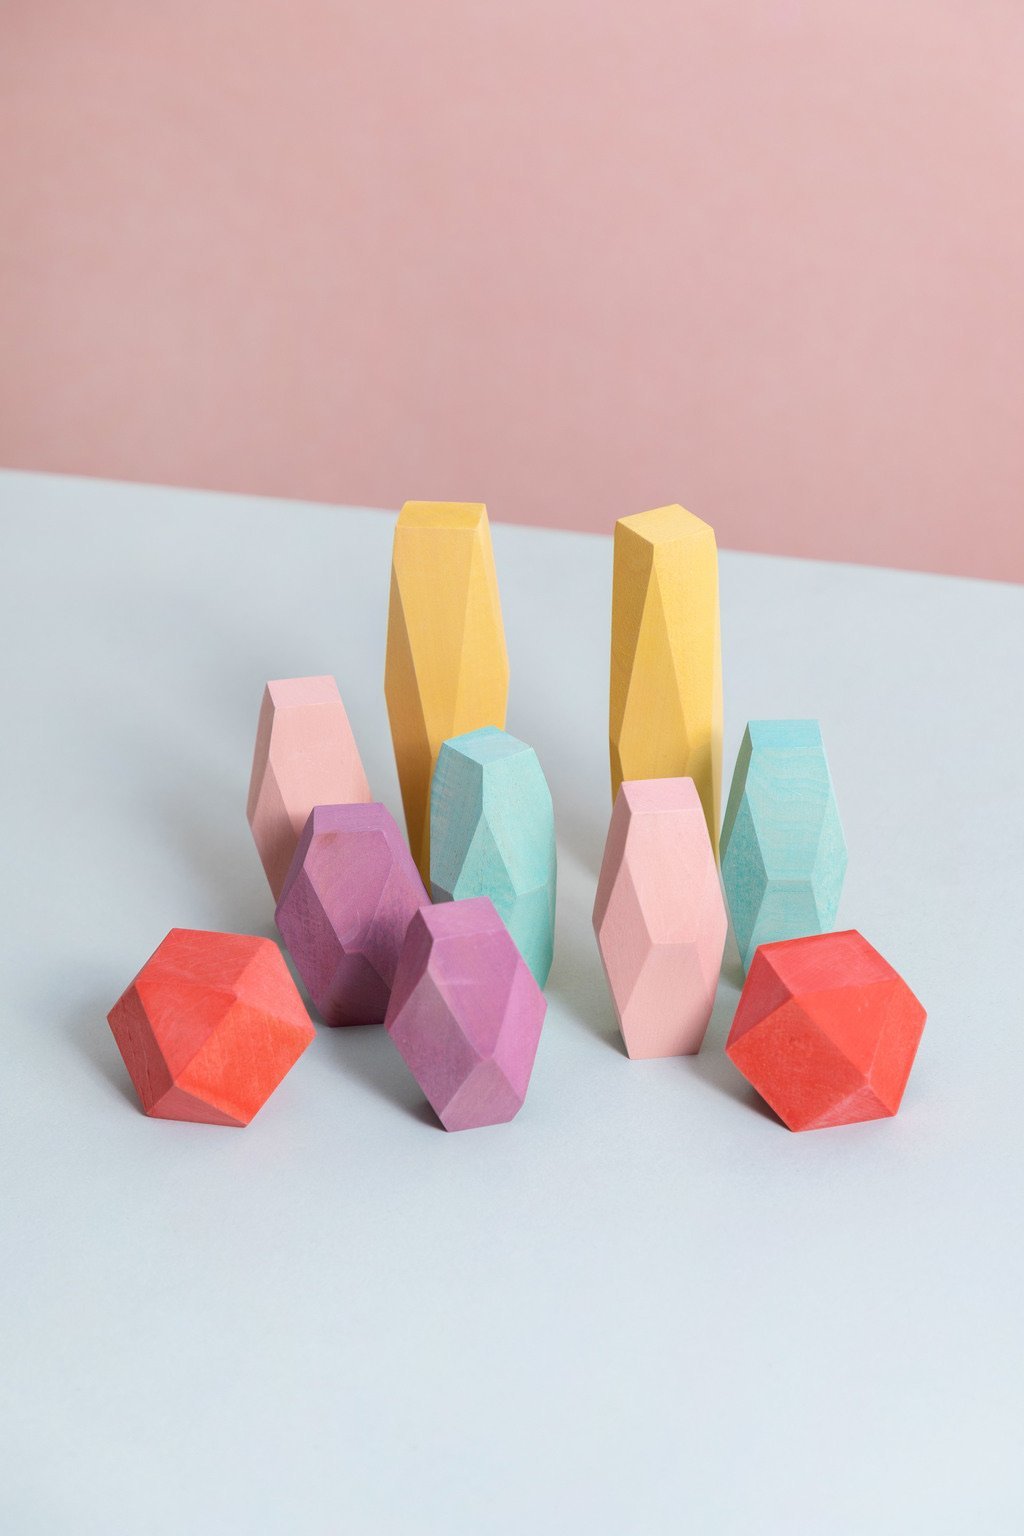 Balance Block Set by Avdar Toys - Wood Wood Toys Canada's Favourite Montessori Toy Store